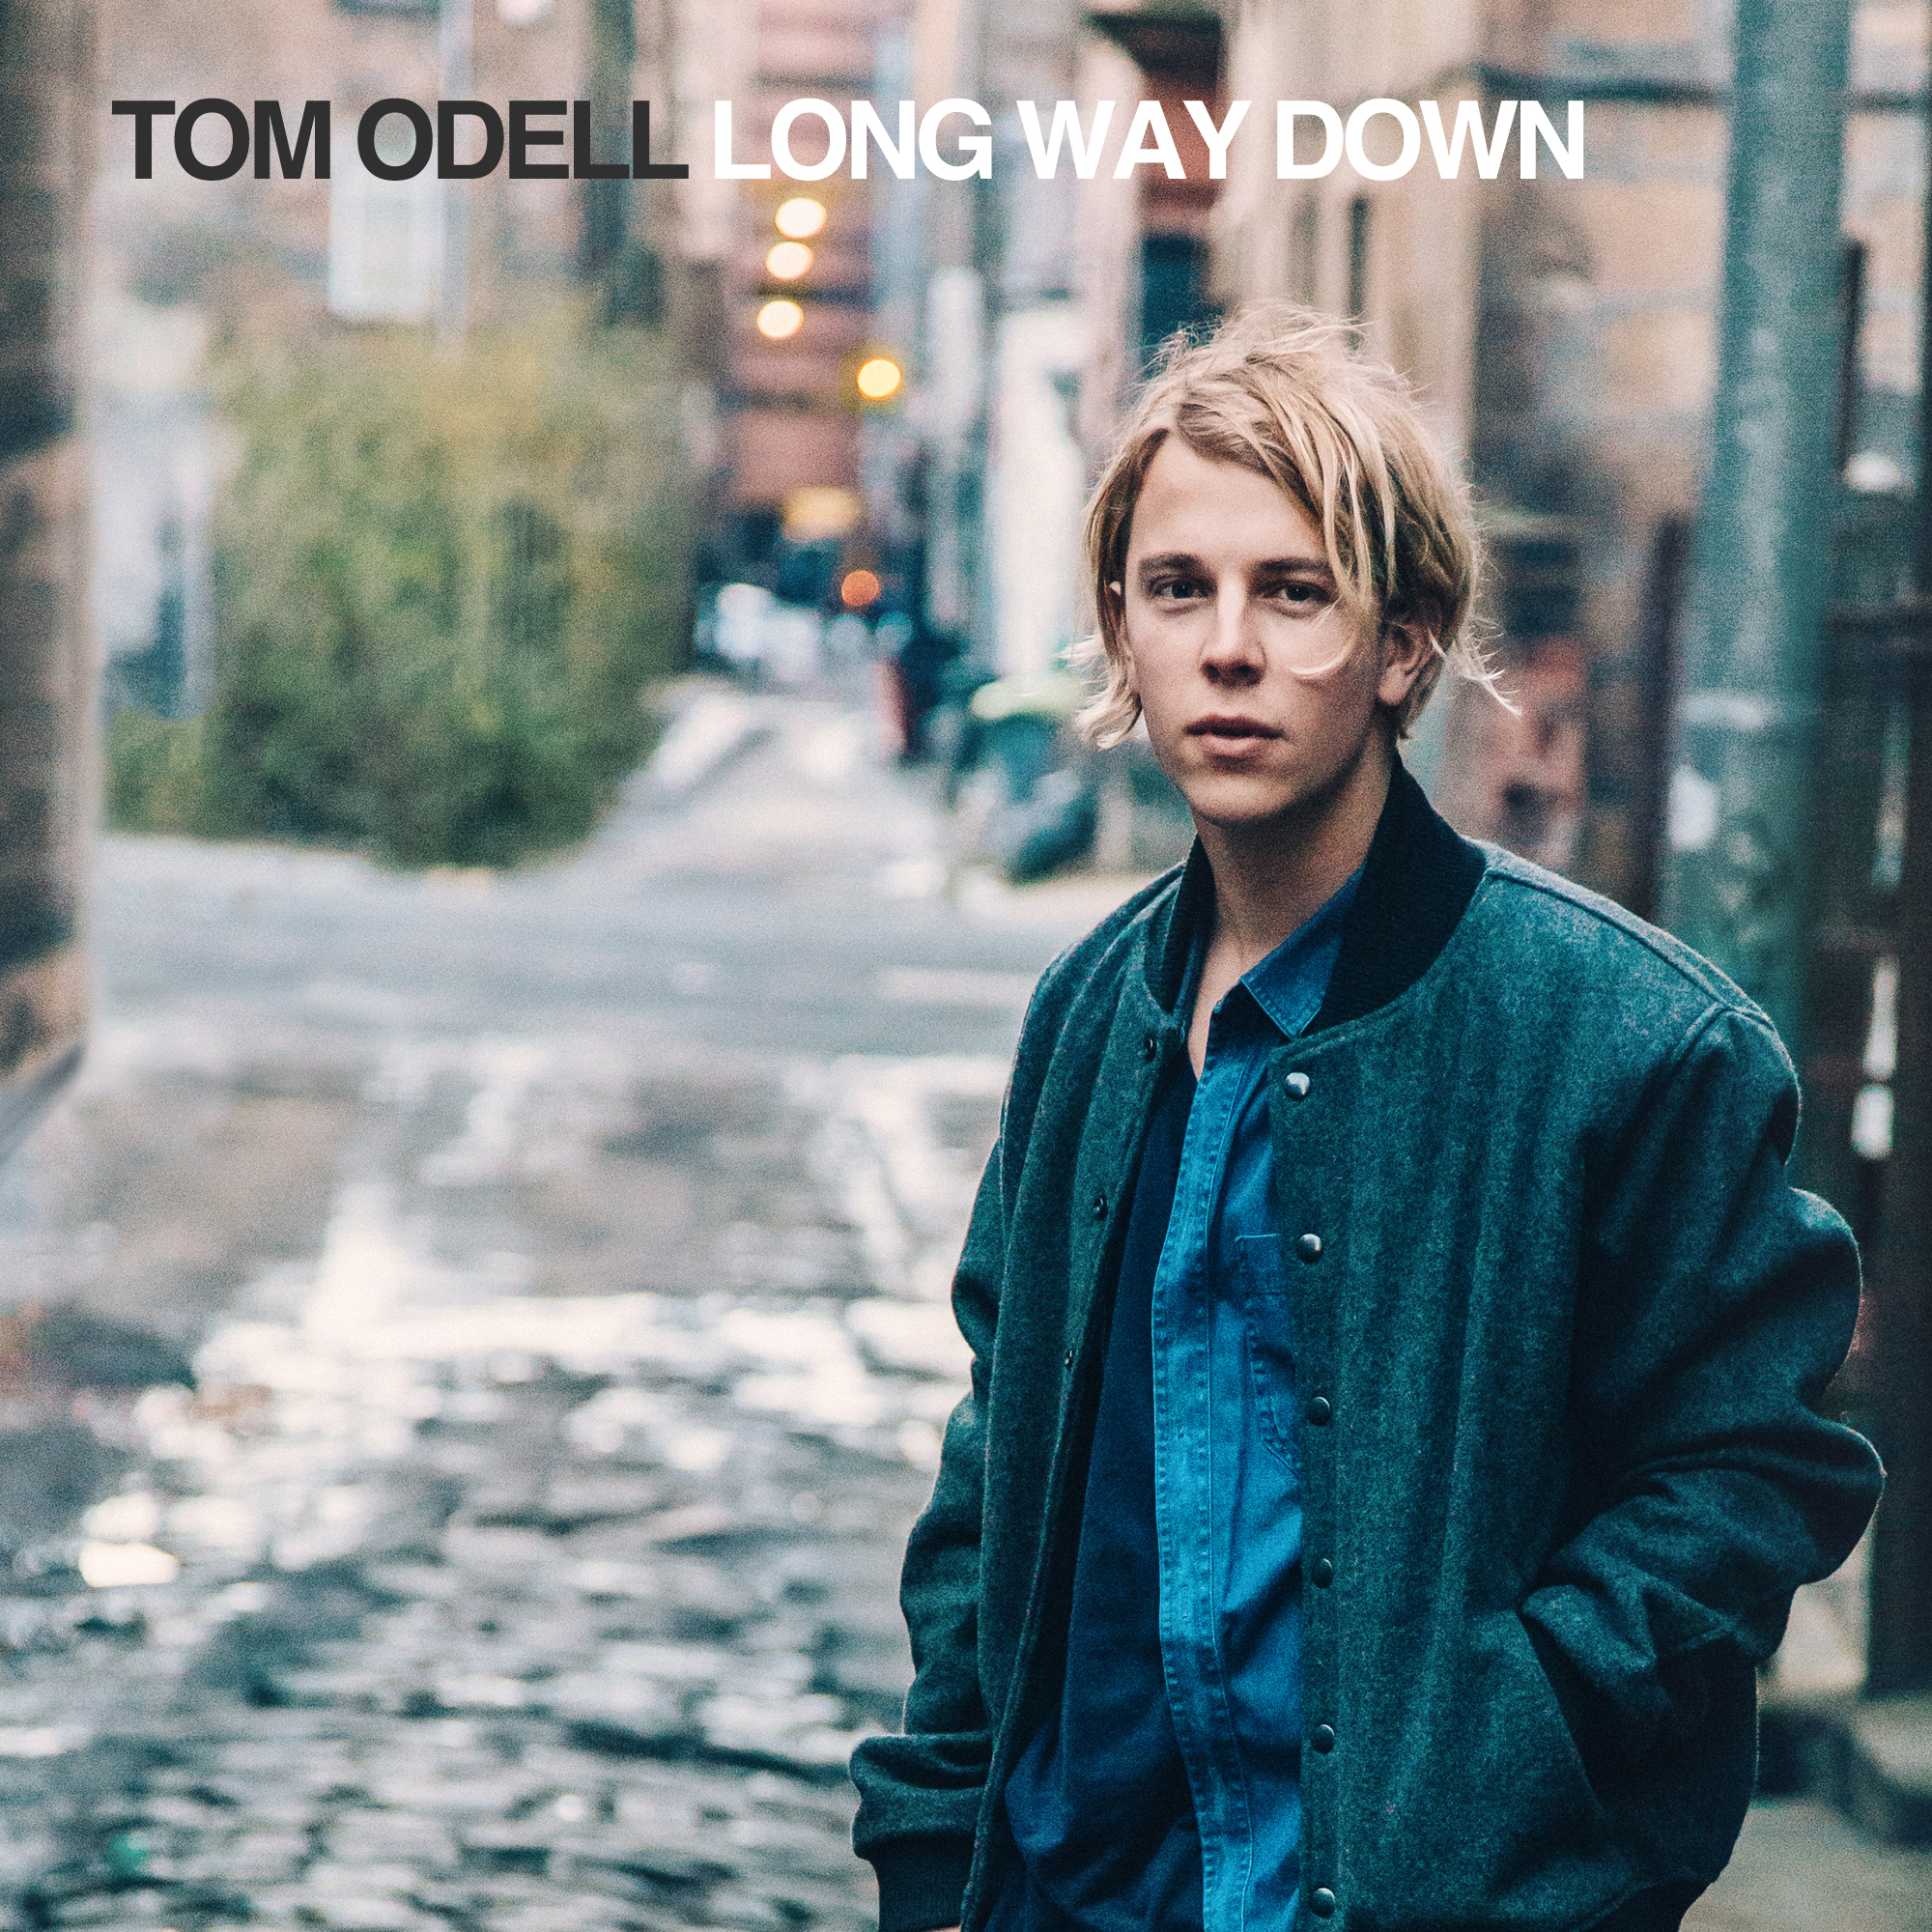 Another love tom odell на русский. Tom Odell 2021. Tom Odell 2022. Tom Odell 2018. Tom Odell 2013.